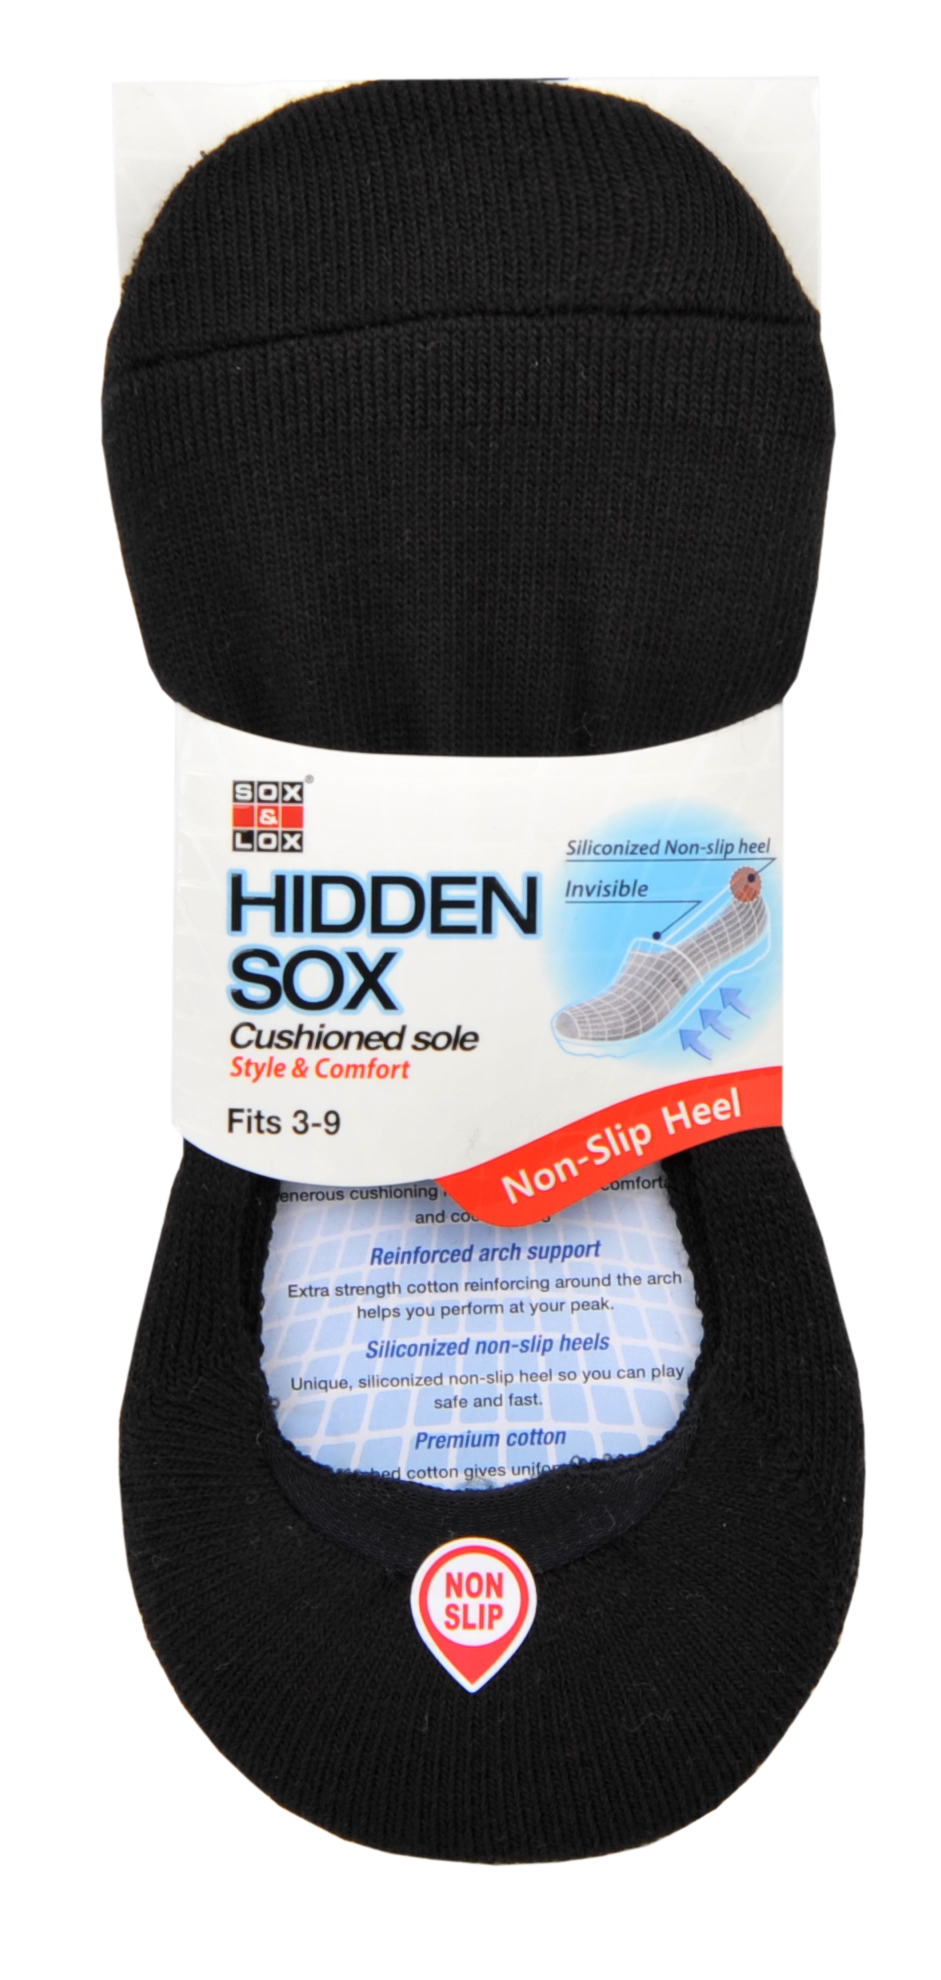 Best No show socks for women with cushioned sole and non-slip heels. 